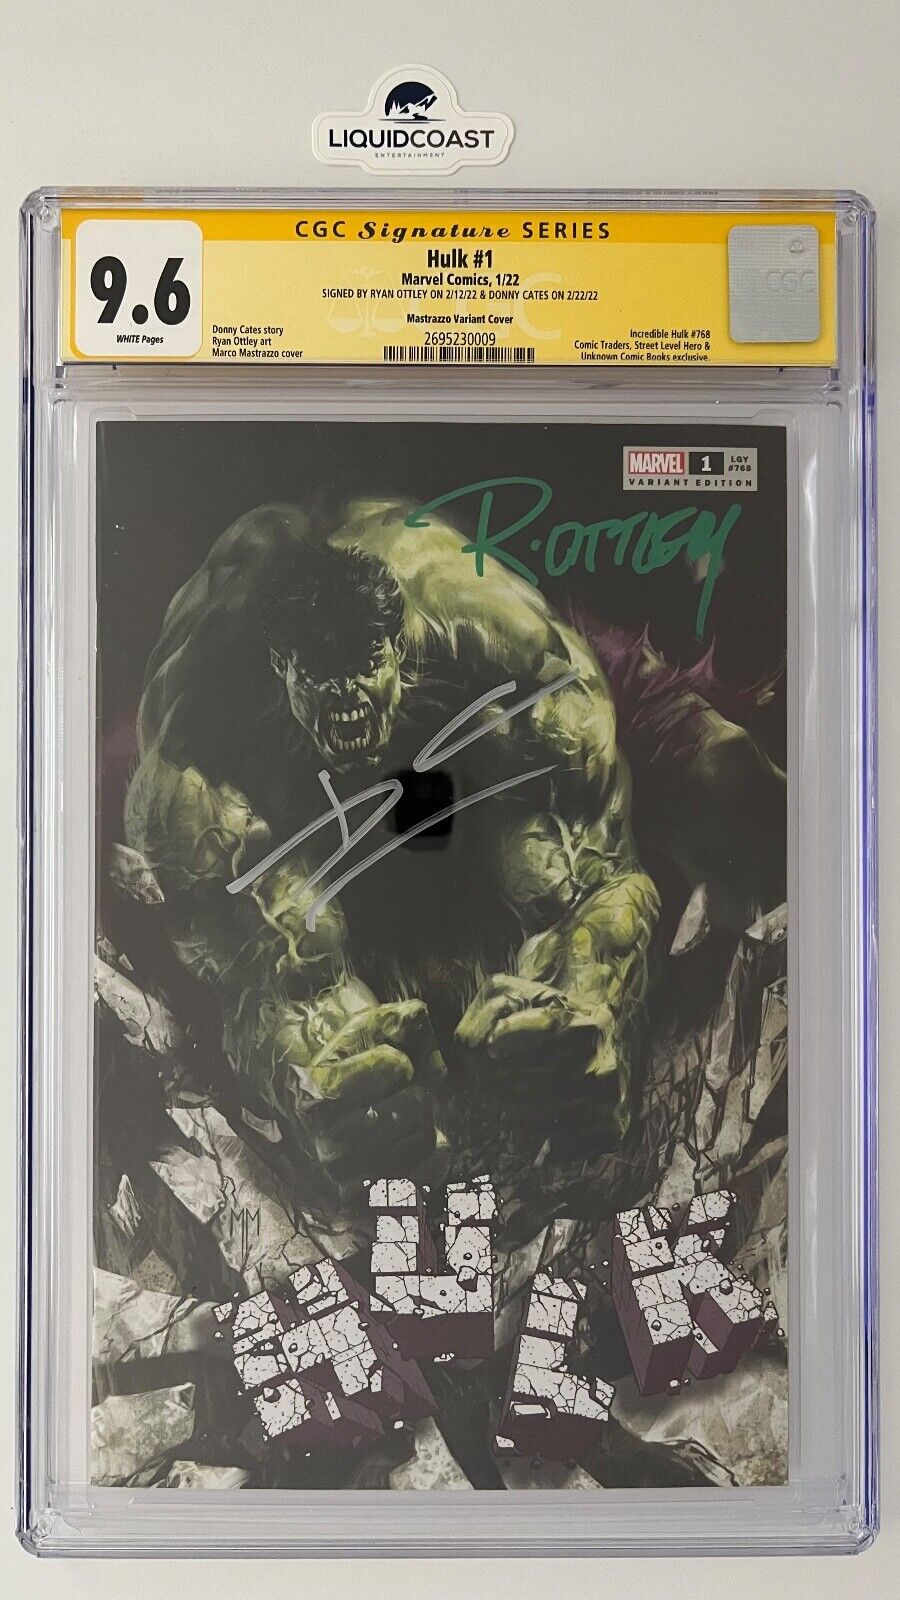 Hulk #1 SS CGC 9.6 signed by Ryan Ottley and Donny Cates